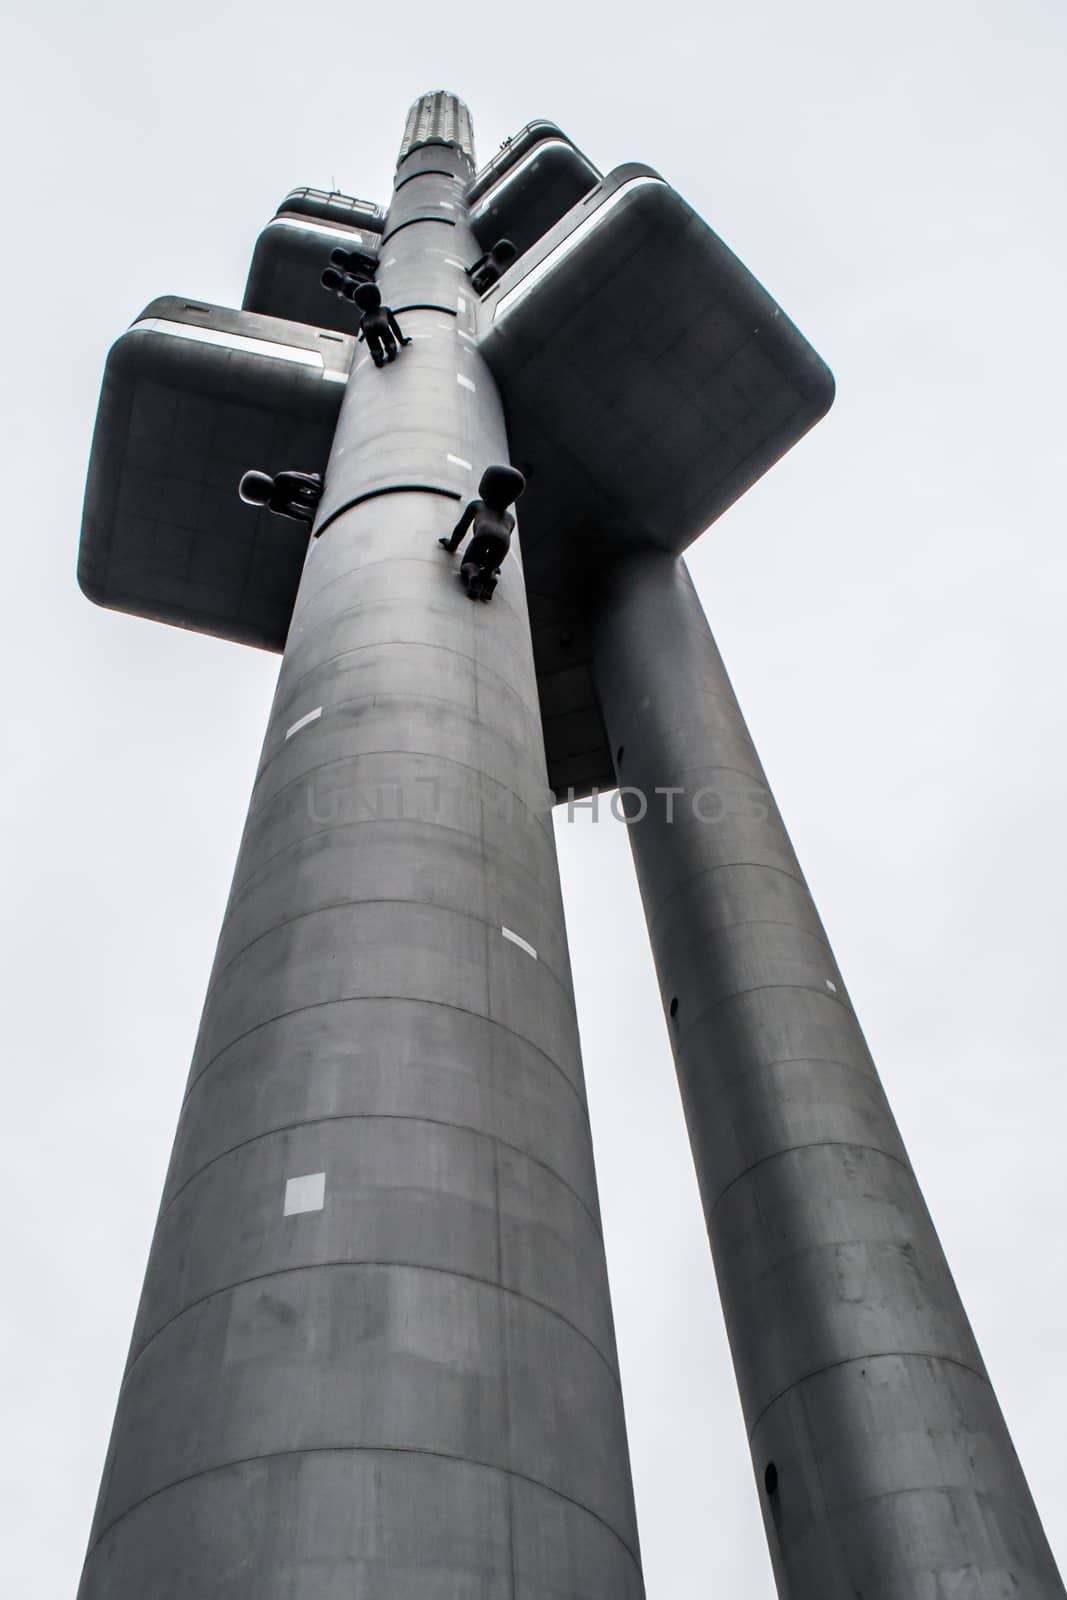 Zizkov TV tower in Prague from low angle point of view. Travel, tourism and architecture by kb79